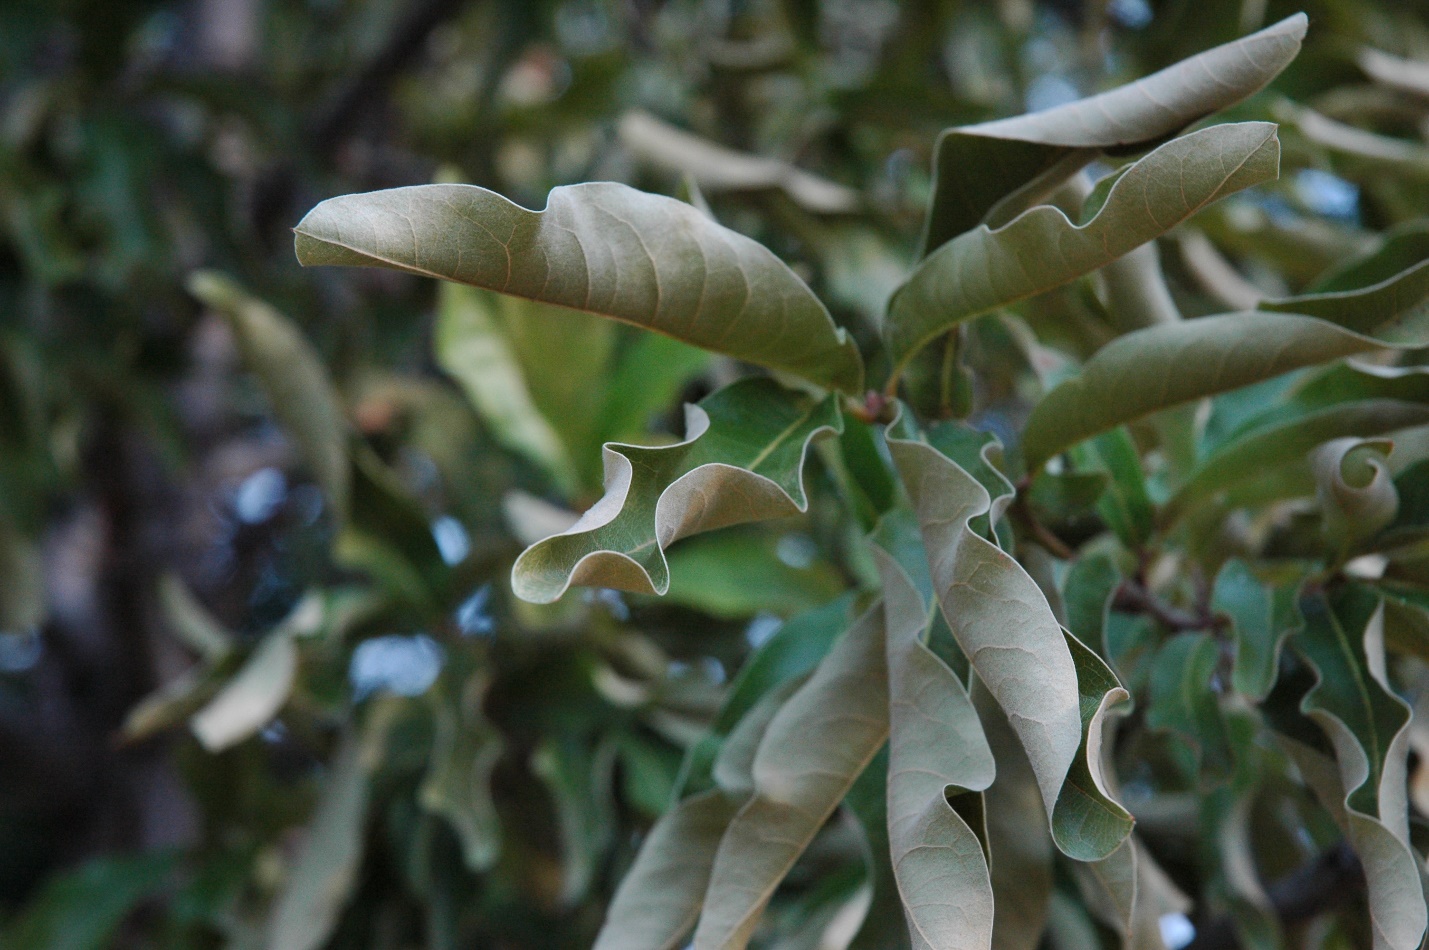 Curled leaves.